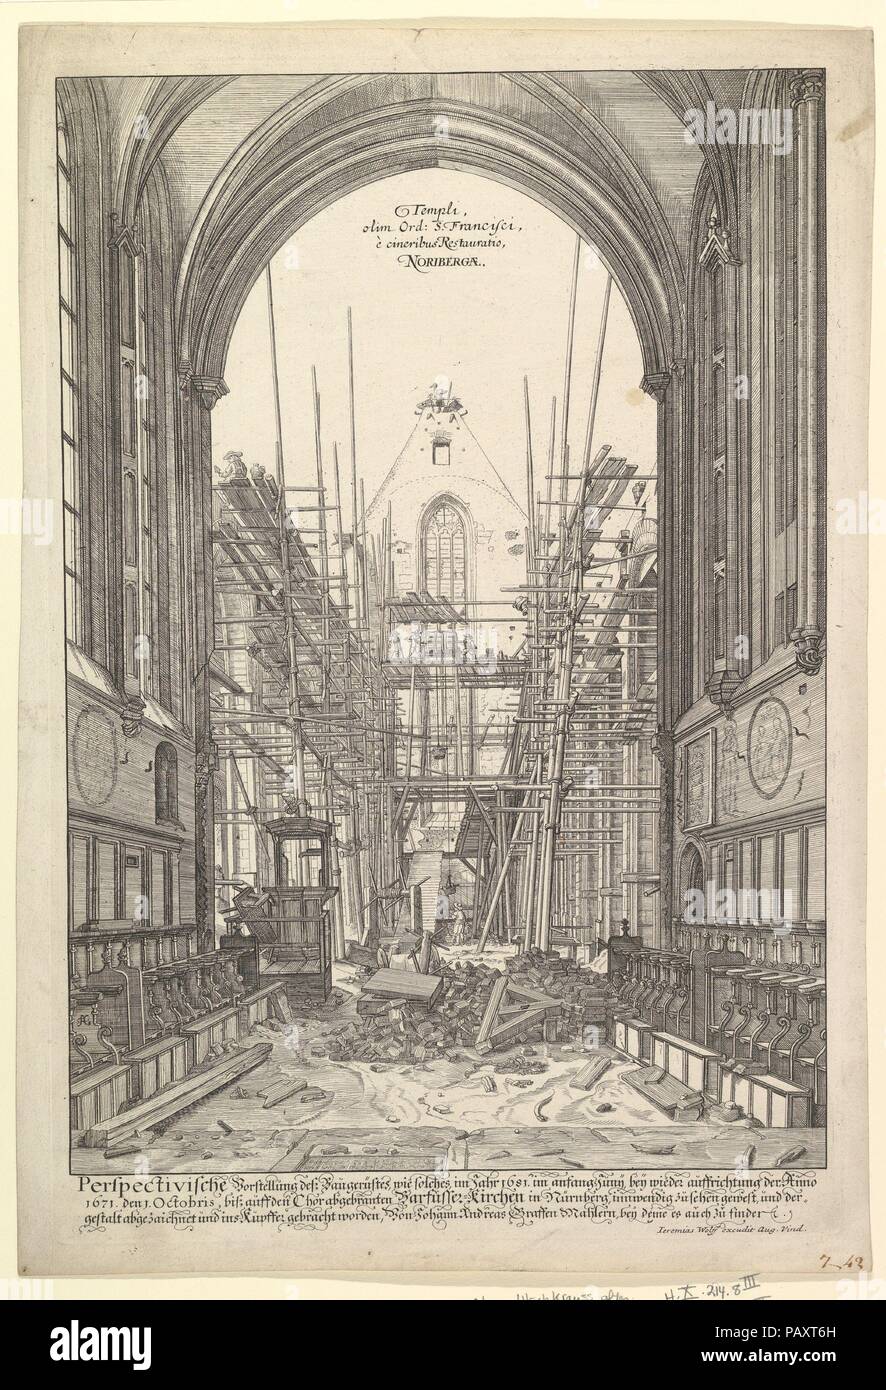 View of the Church of the Franciscans in Nuremberg under Reconstruction, from the series Views of Nuremberg. Artist: Johann Ulrich Kraus (German, 1655-1719); Designed by Johann Andreas Graff (German, 1637-1701). Date: n.d.. Museum: Metropolitan Museum of Art, New York, USA. Stock Photo